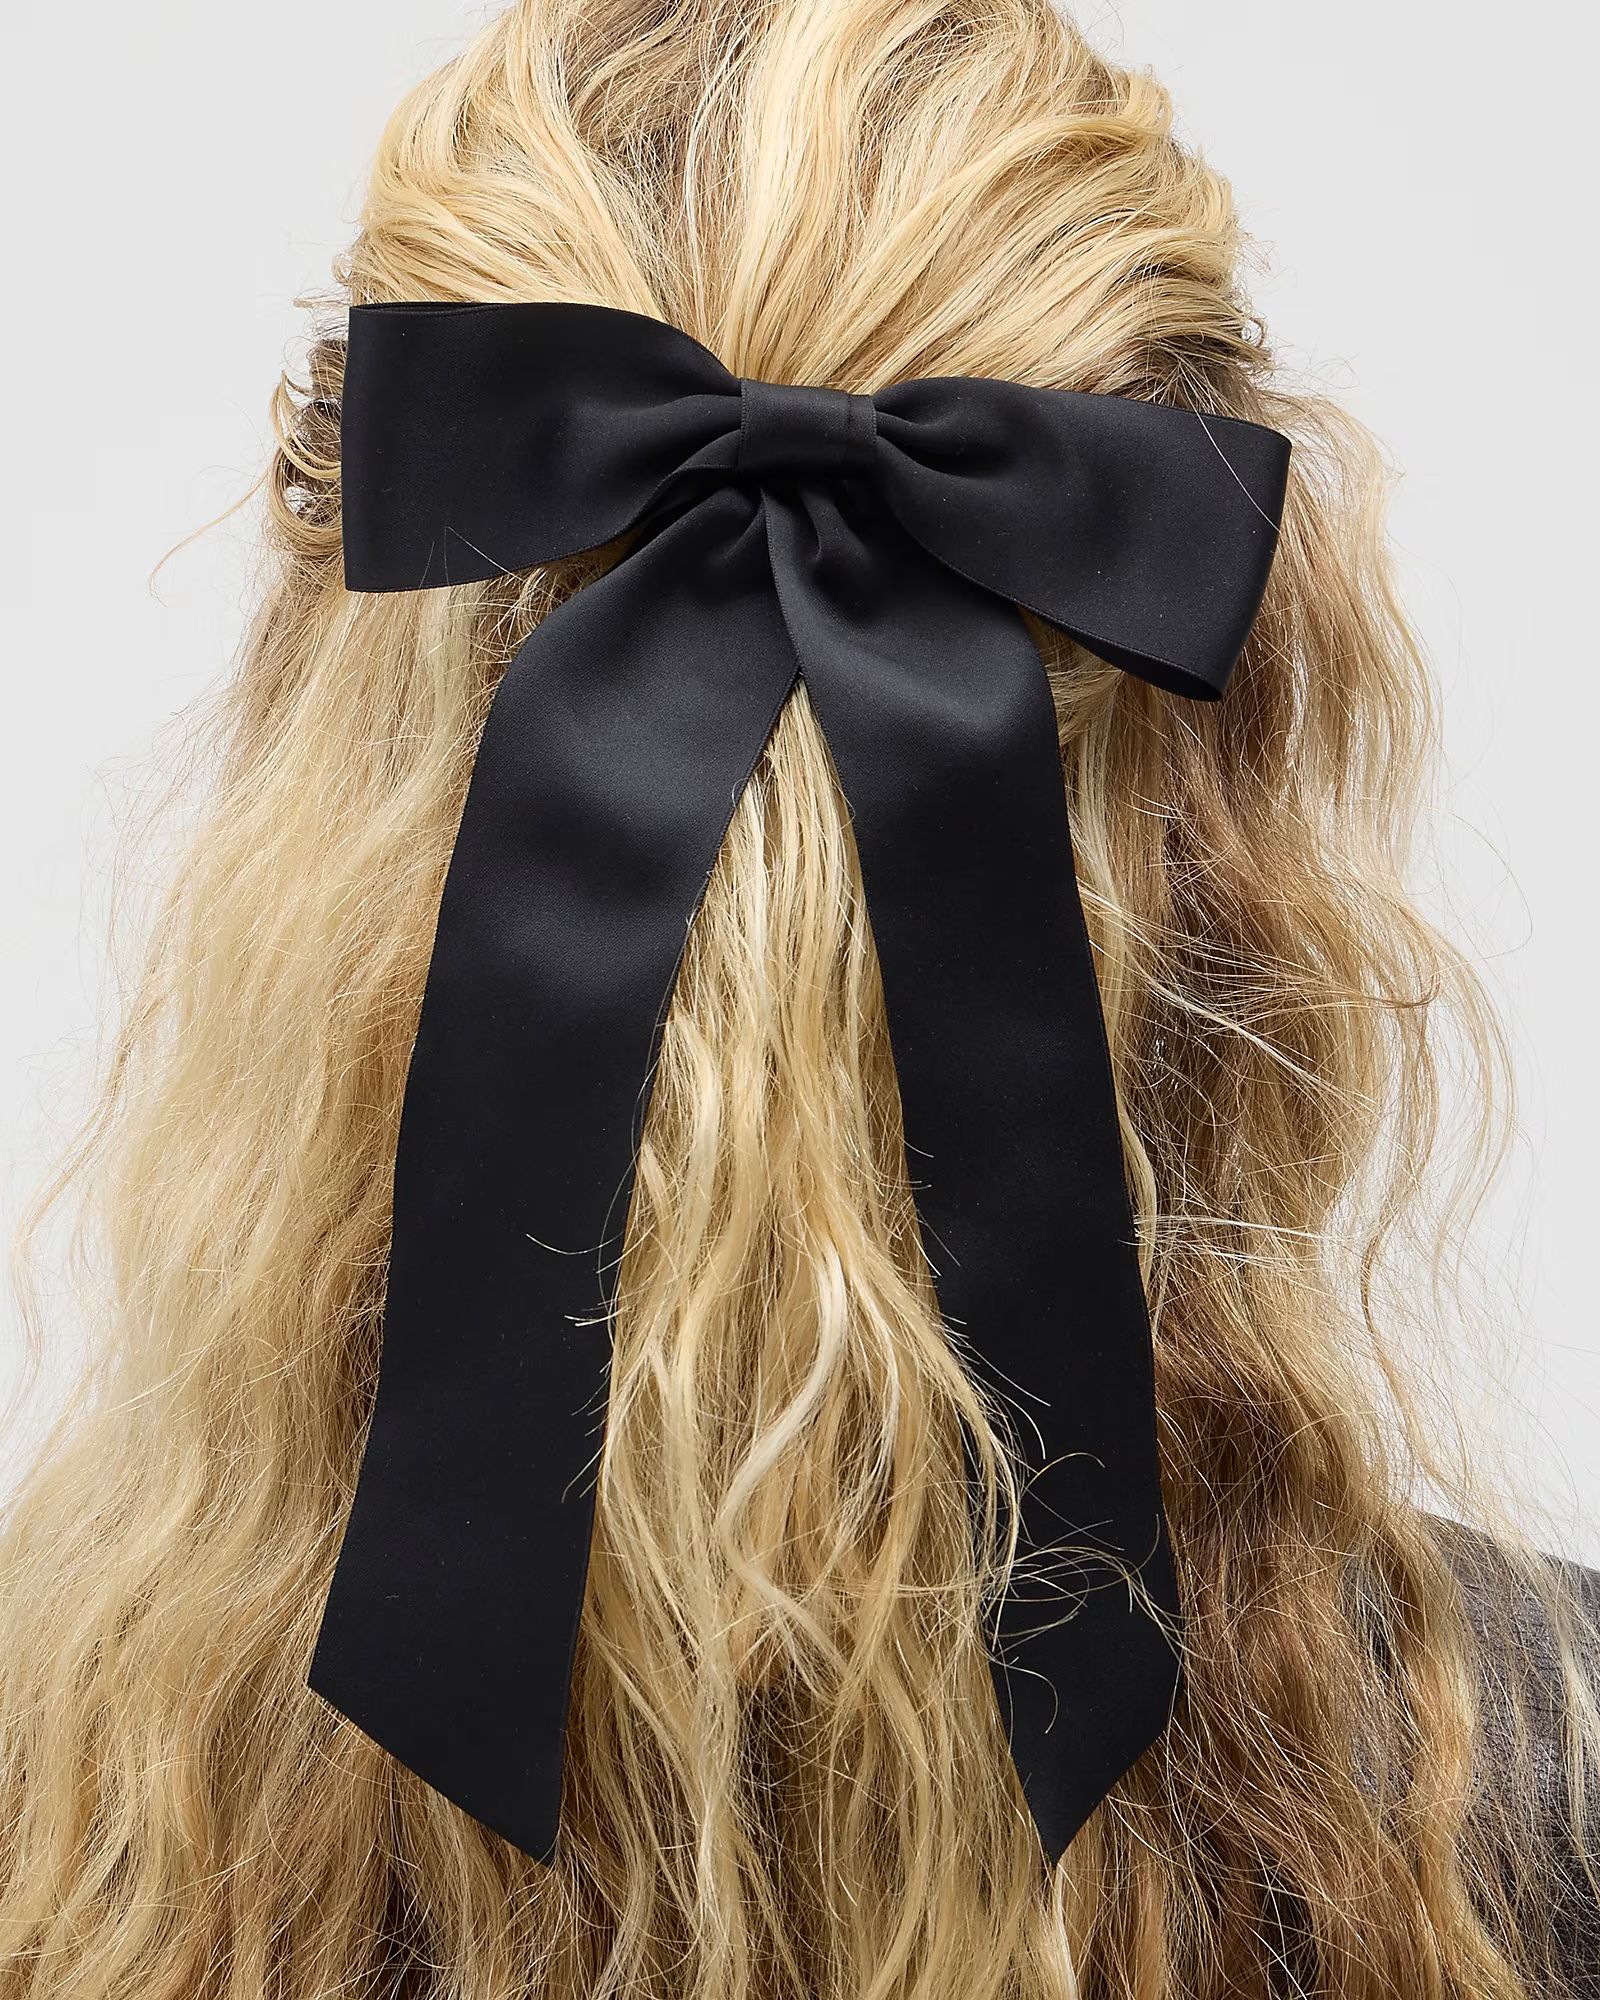 Oversized bow hair tie$29.5030% off full price with code SHOPNOWBlackOne Size  Add to BagShip to ... | J.Crew US